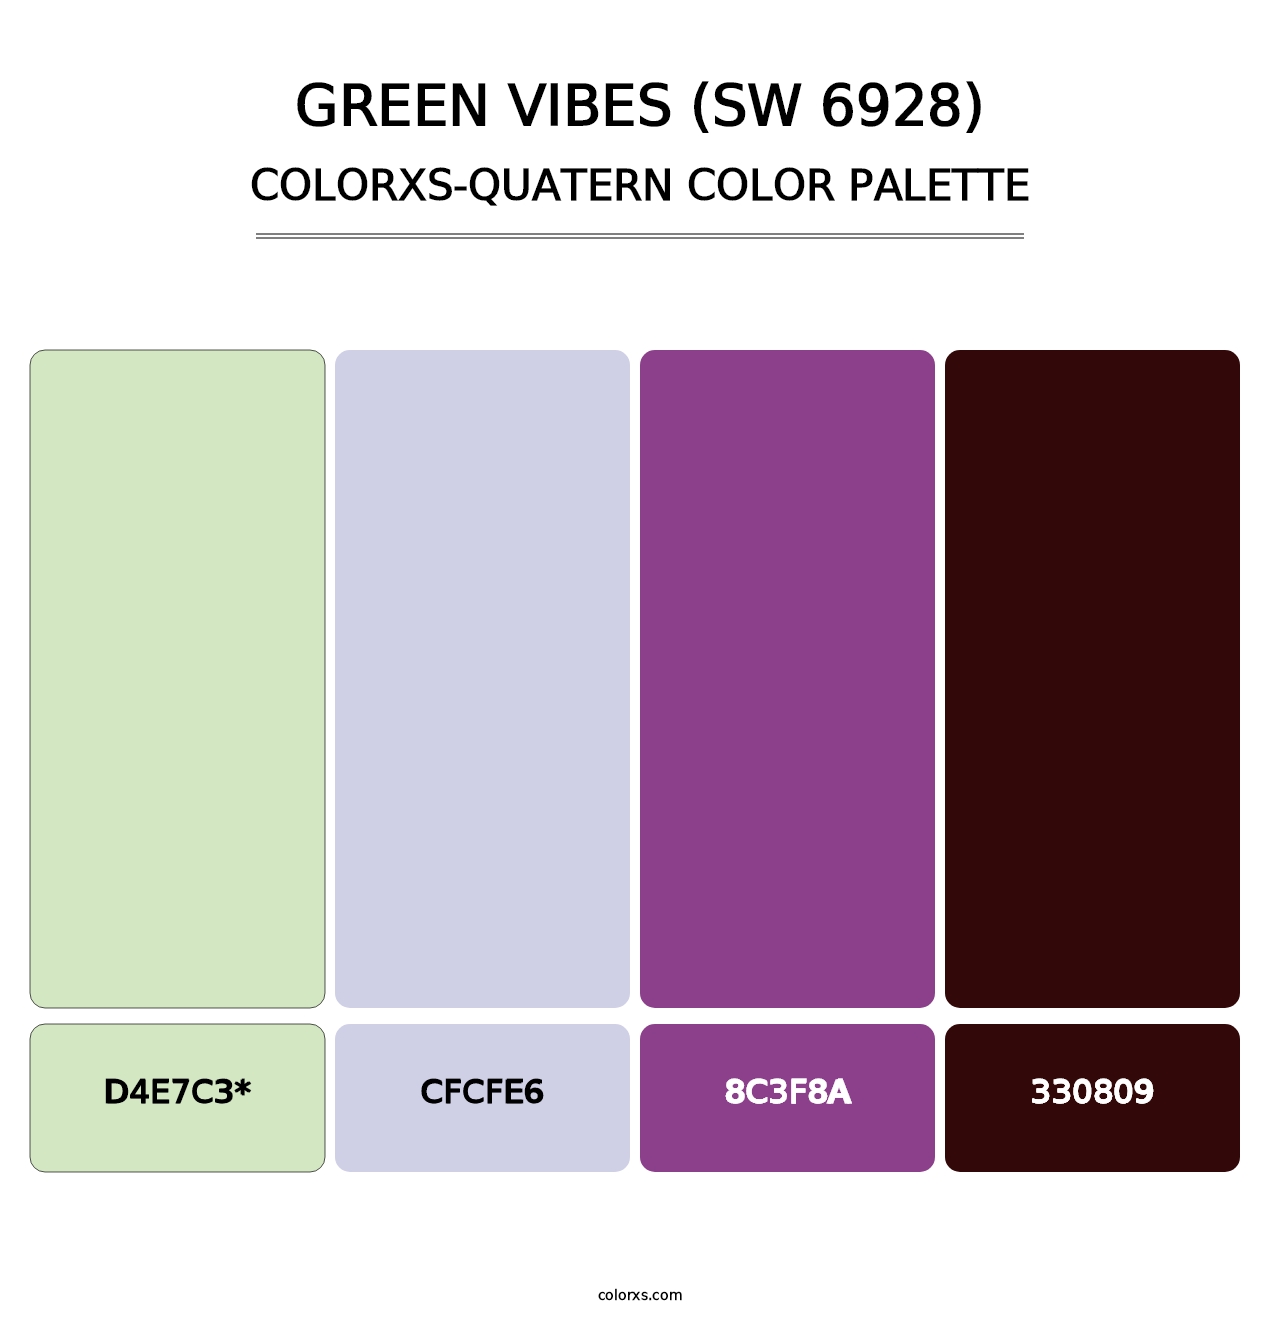 Green Vibes (SW 6928) - Colorxs Quatern Palette